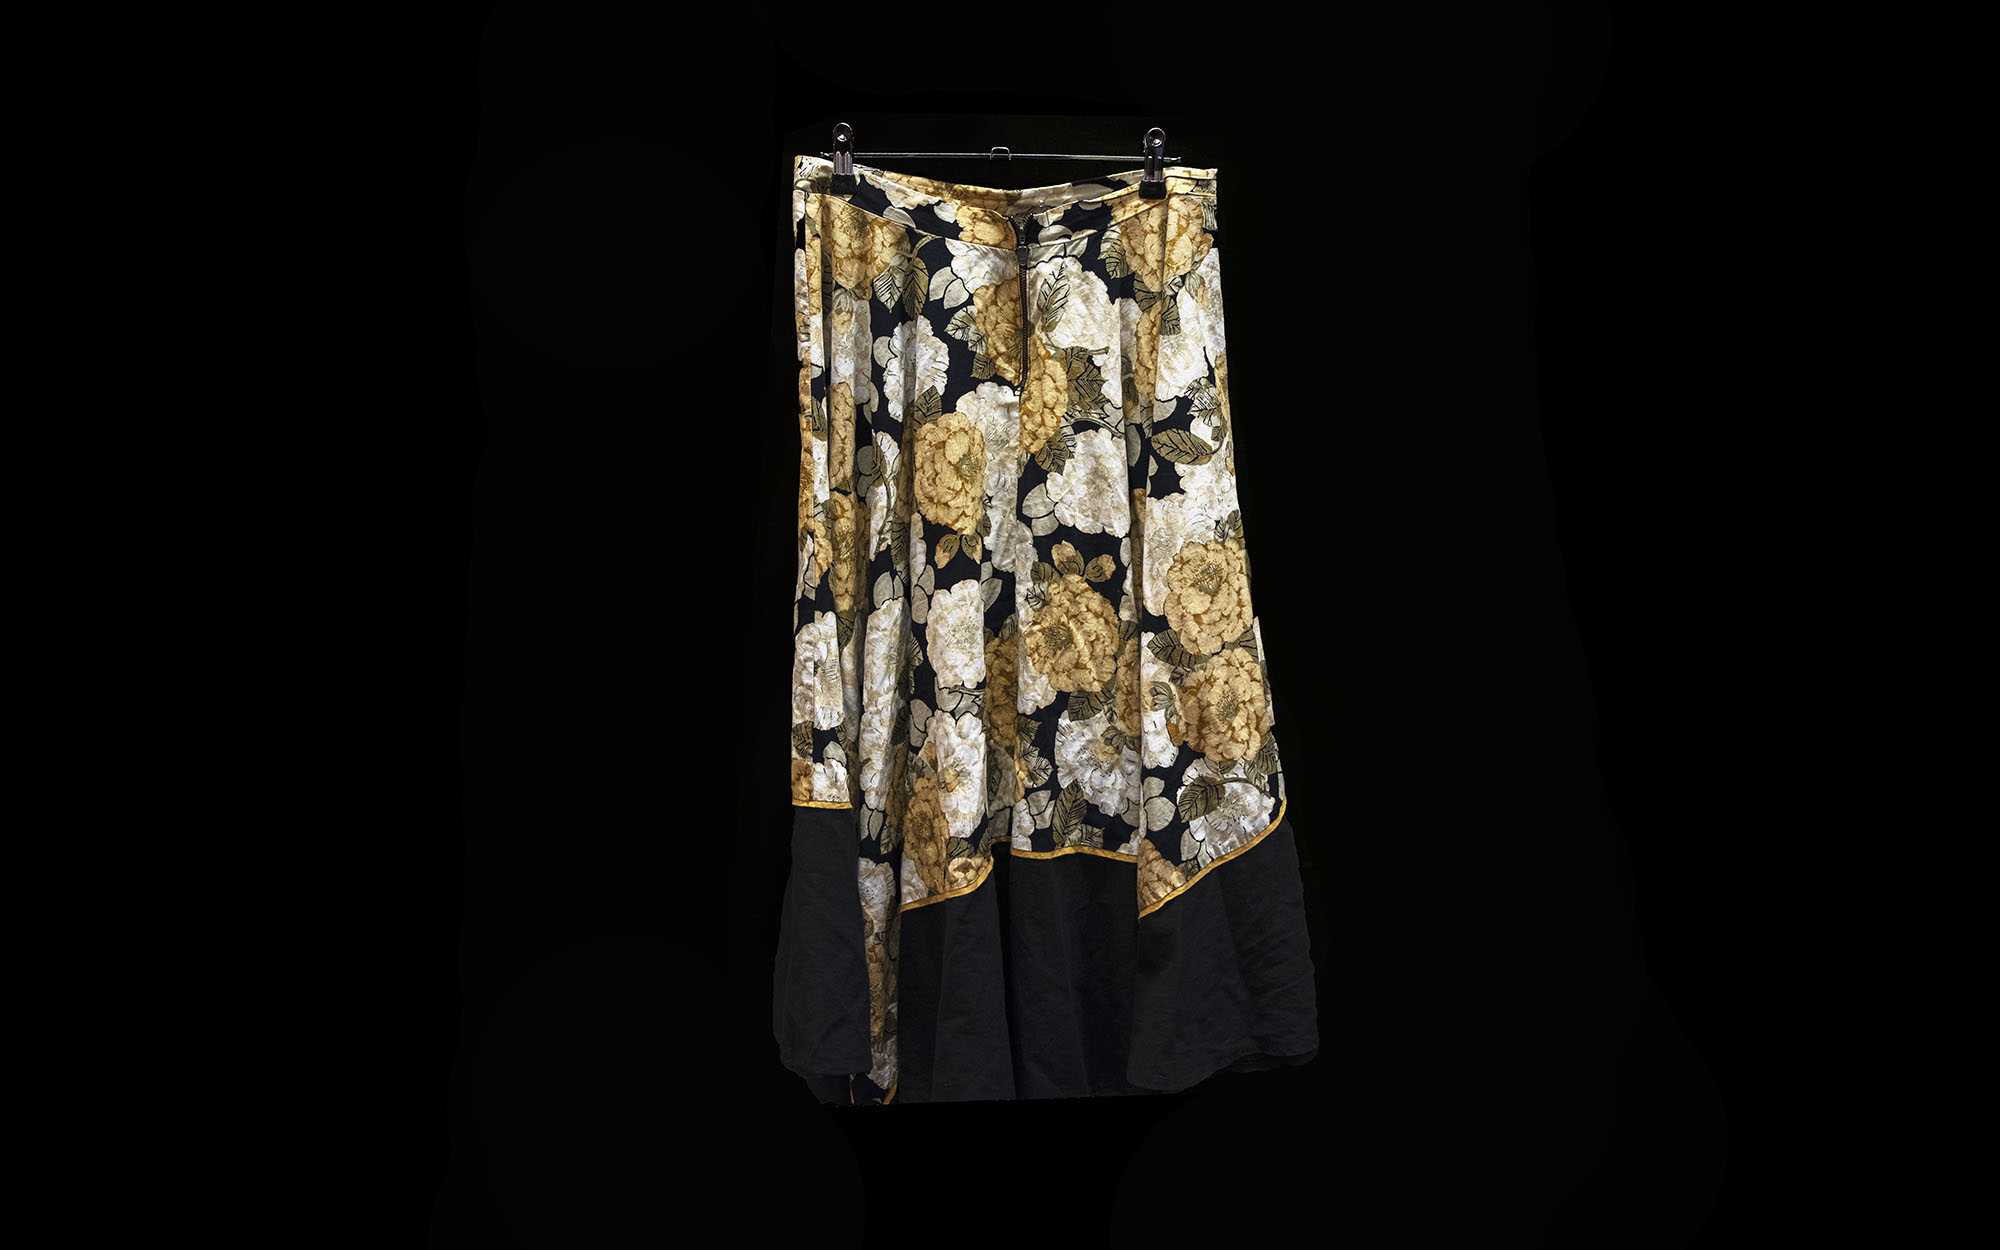 A skirt covered in green, white, and yellow flowers